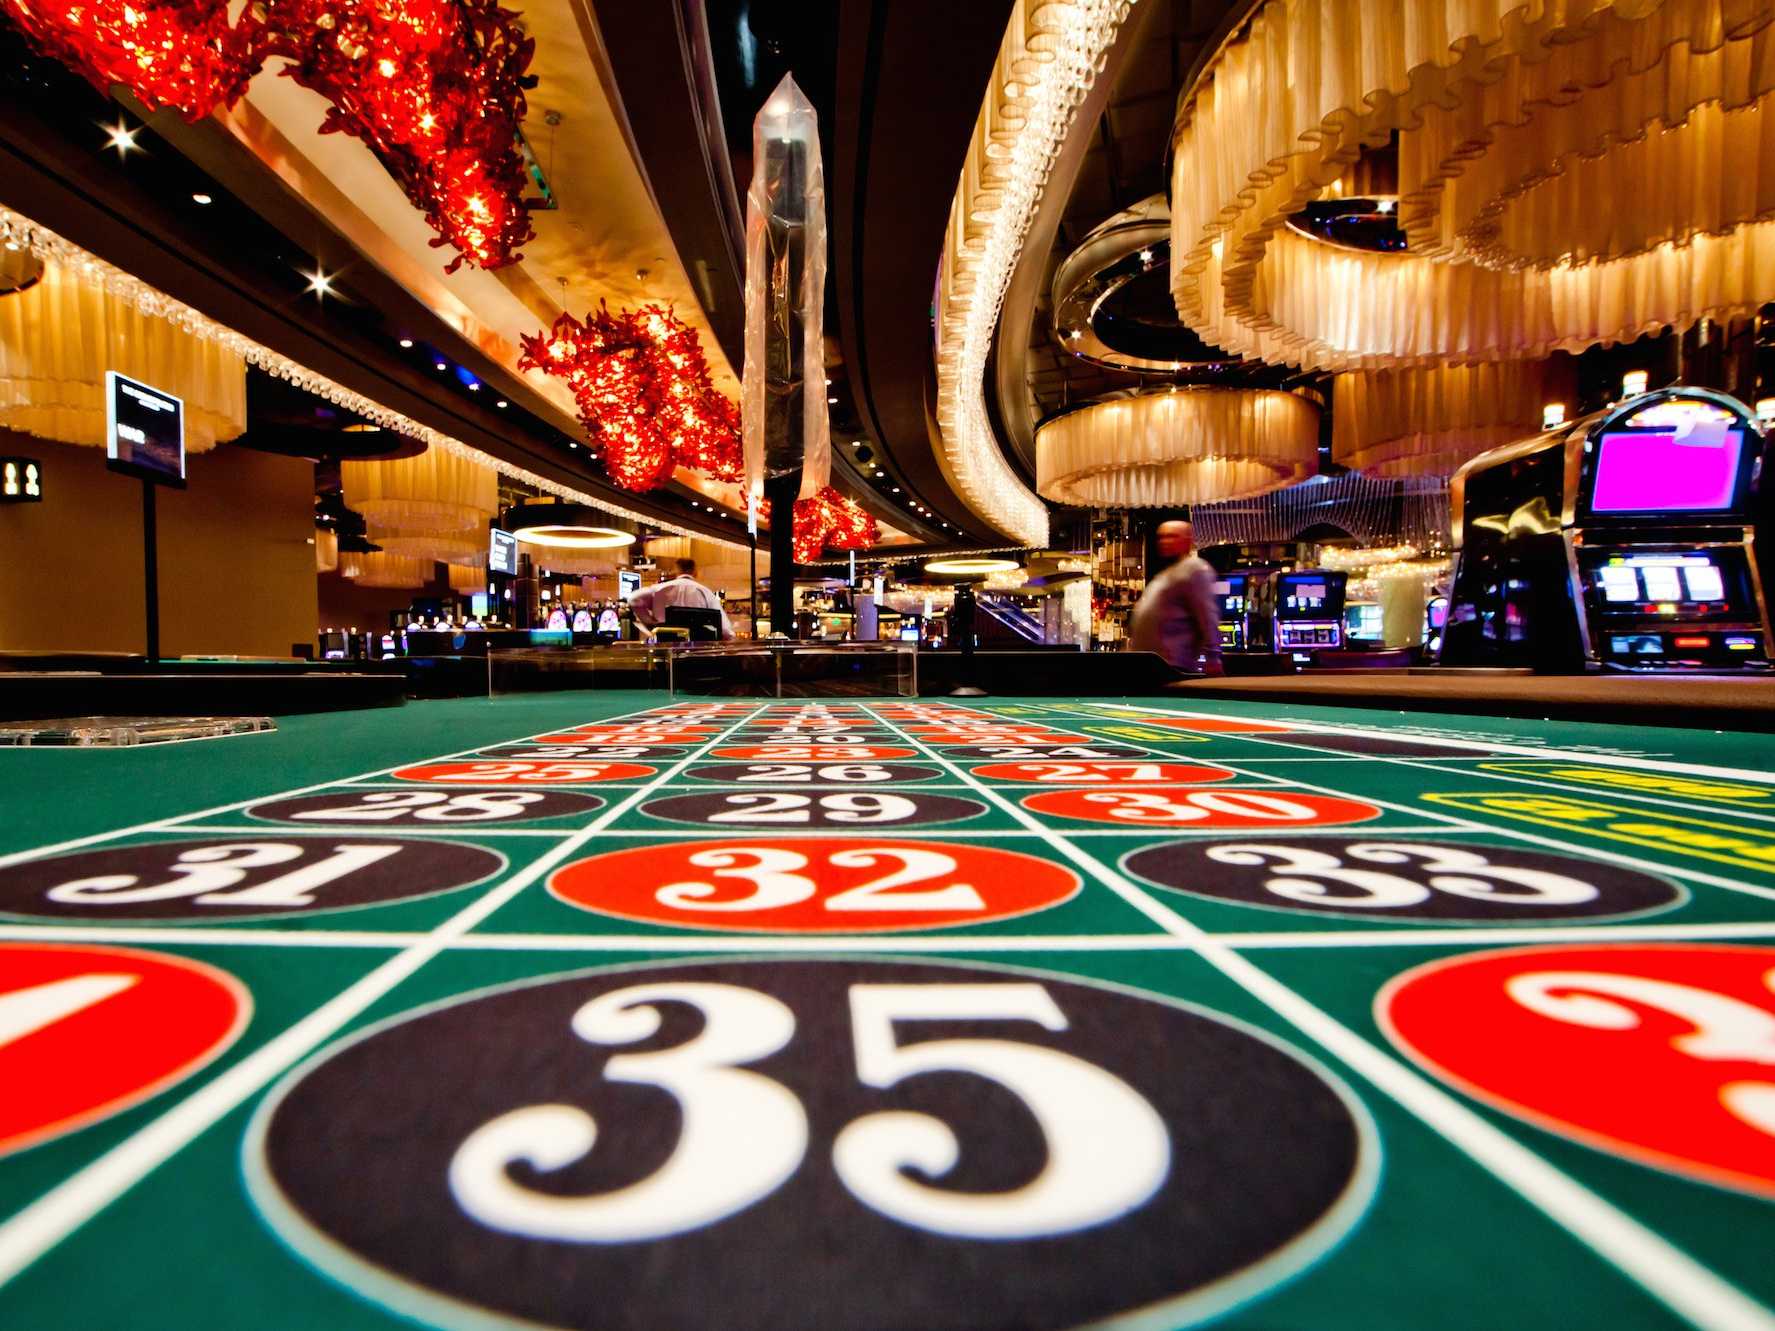 Casino games are well known for their profit and fun!